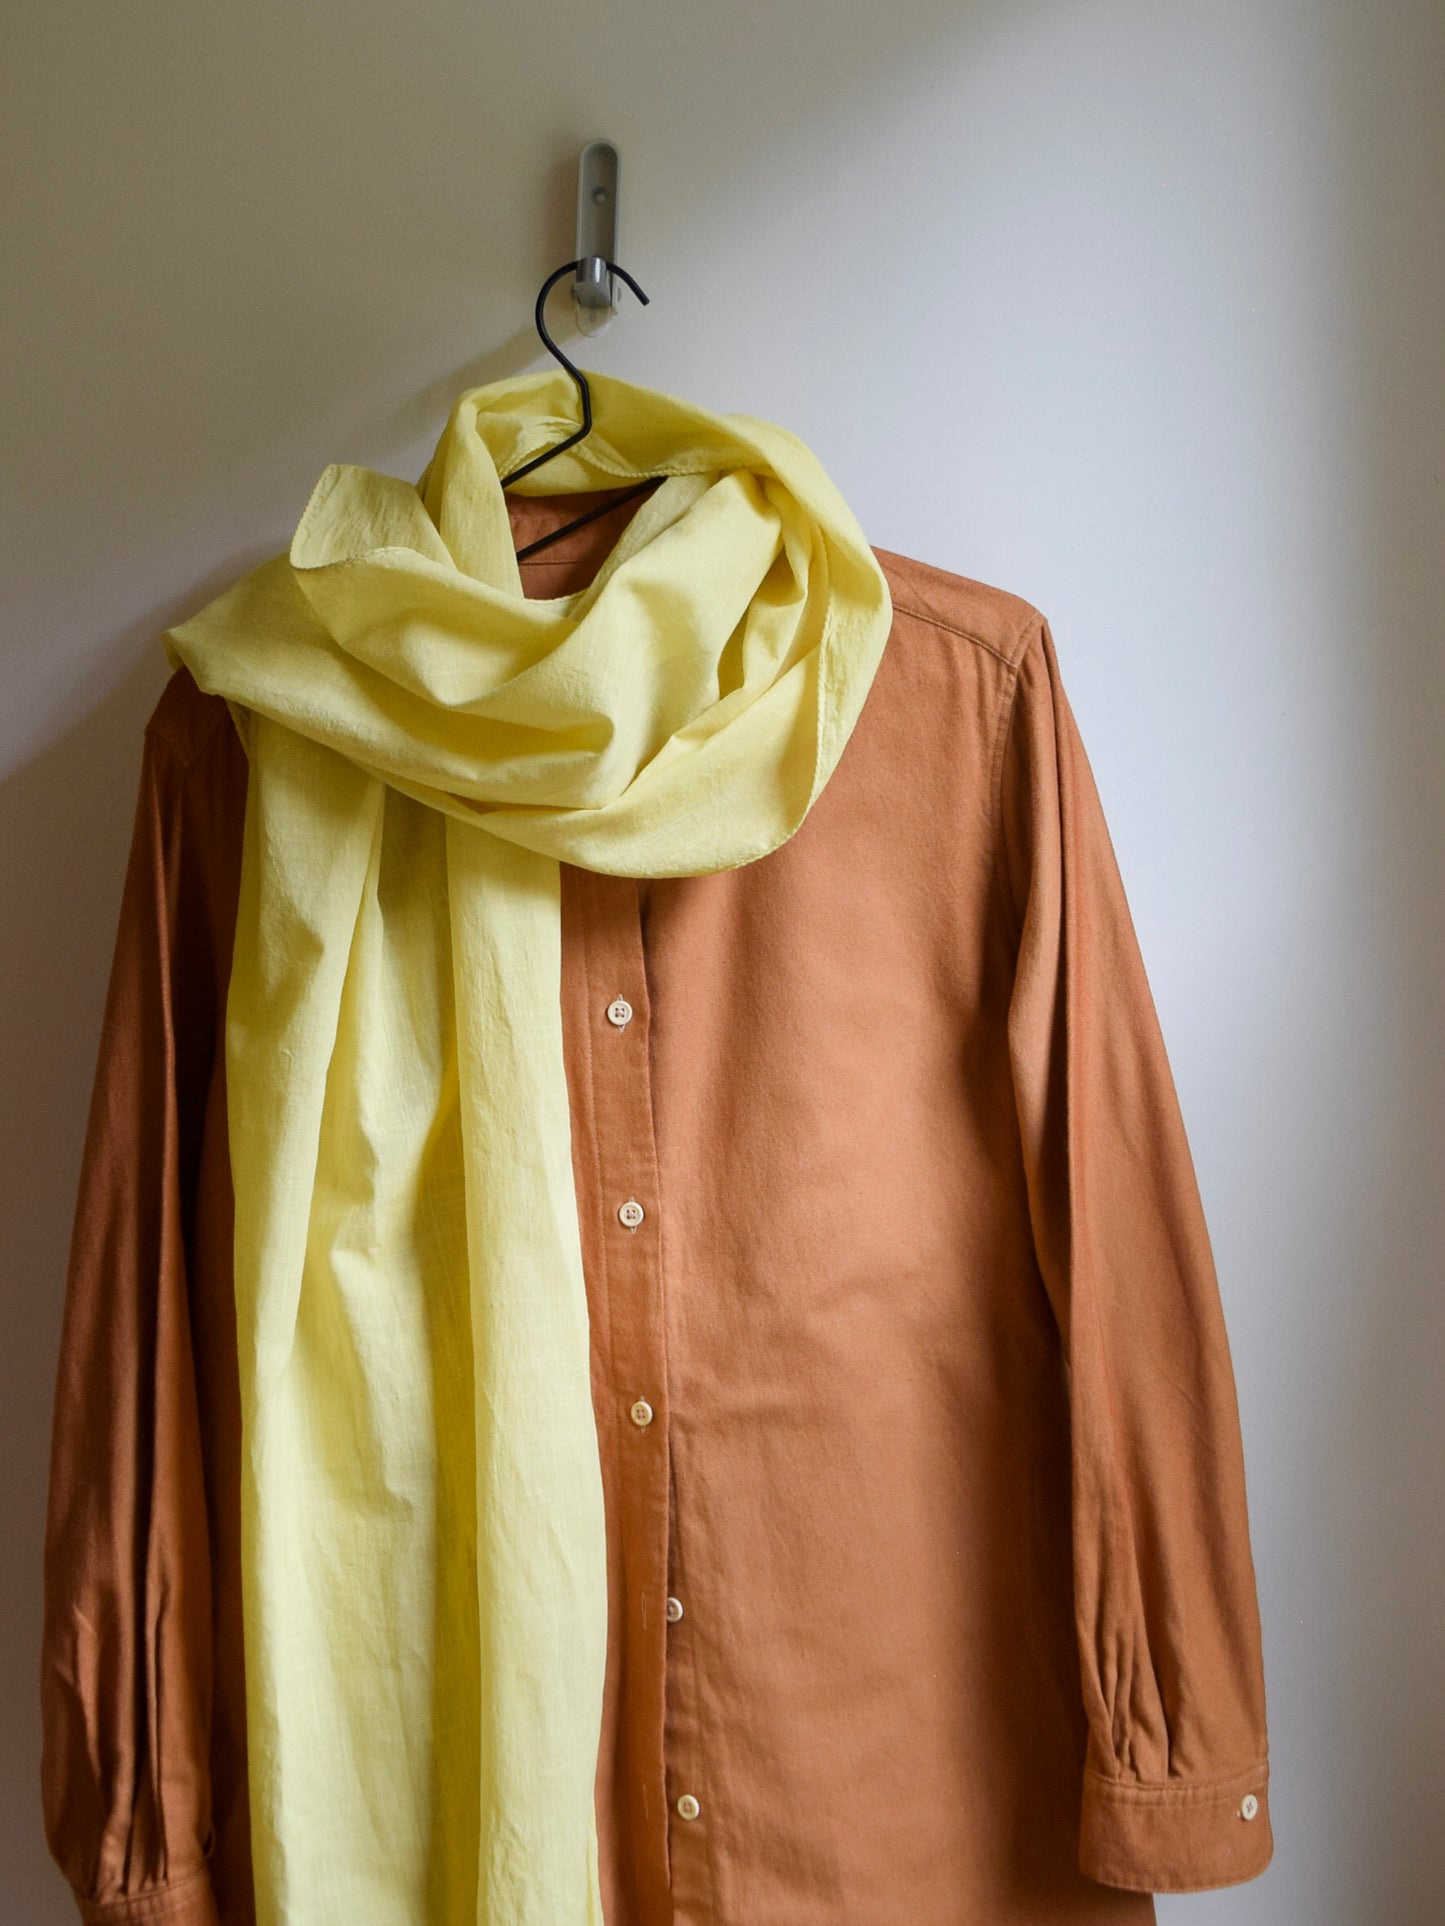 Natural Dyed Organic Cotton Long Scarf - Weld Yellow